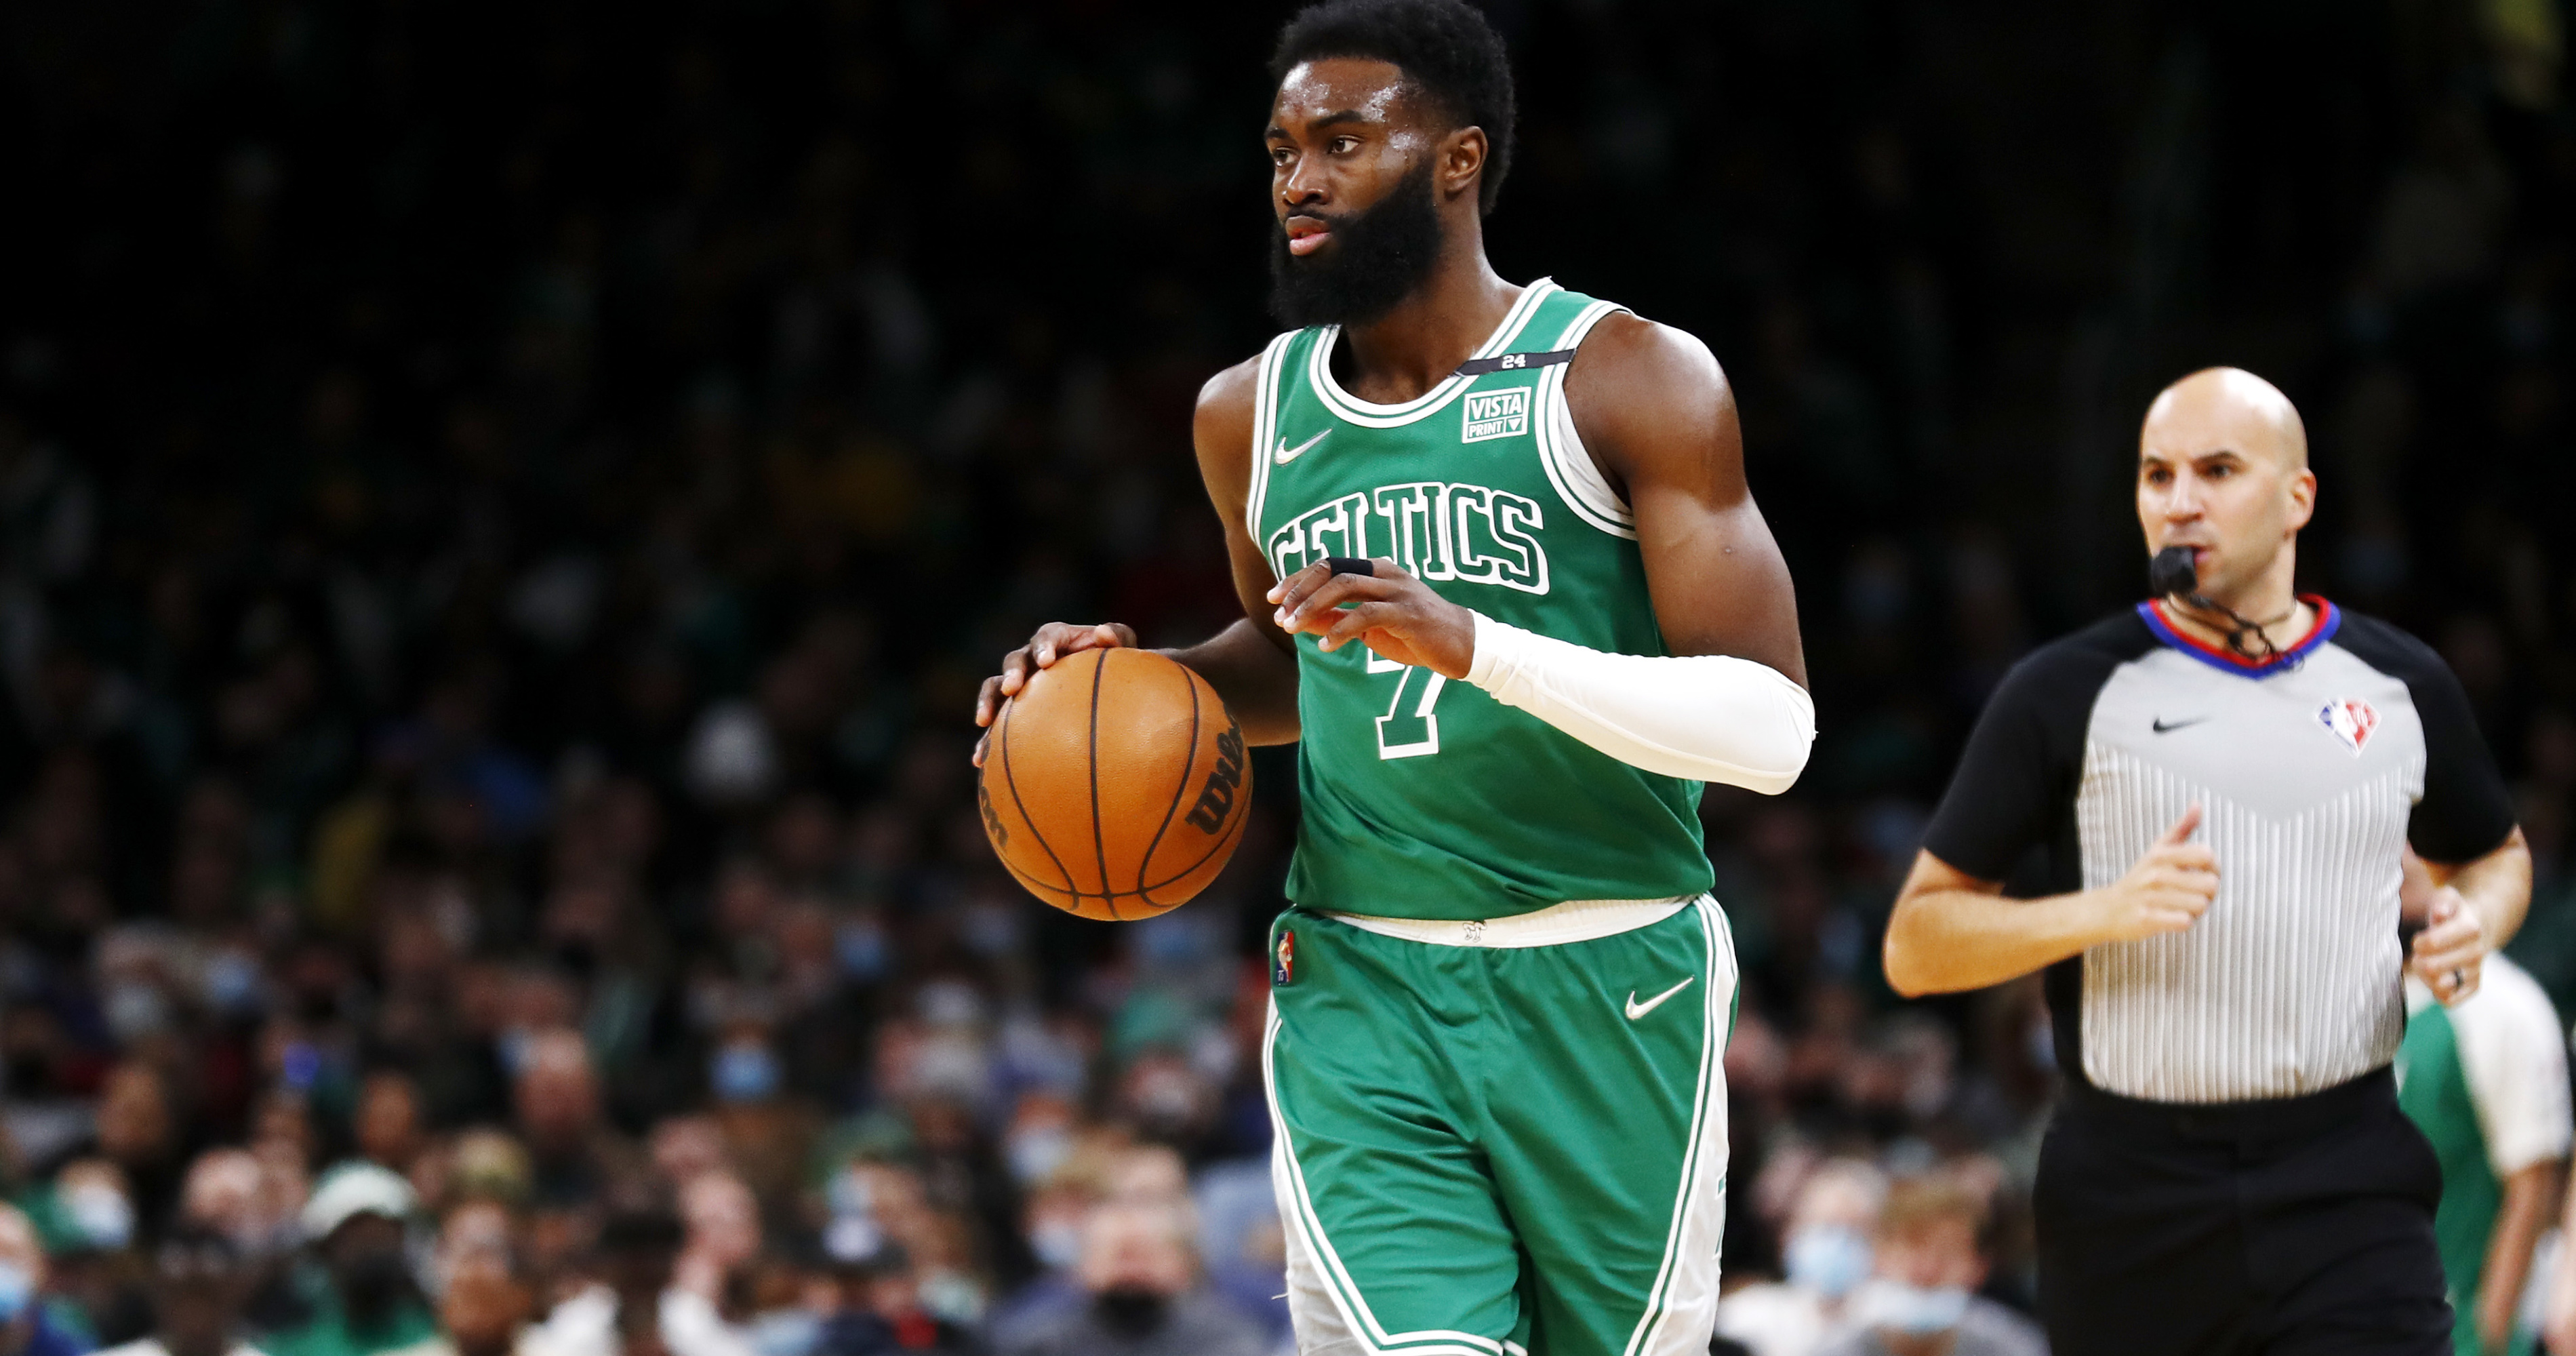 Report: Heat were often mentioned by league figures as 'hopeful' suitors  for Jaylen Brown when Celtics were struggling - Heat Nation